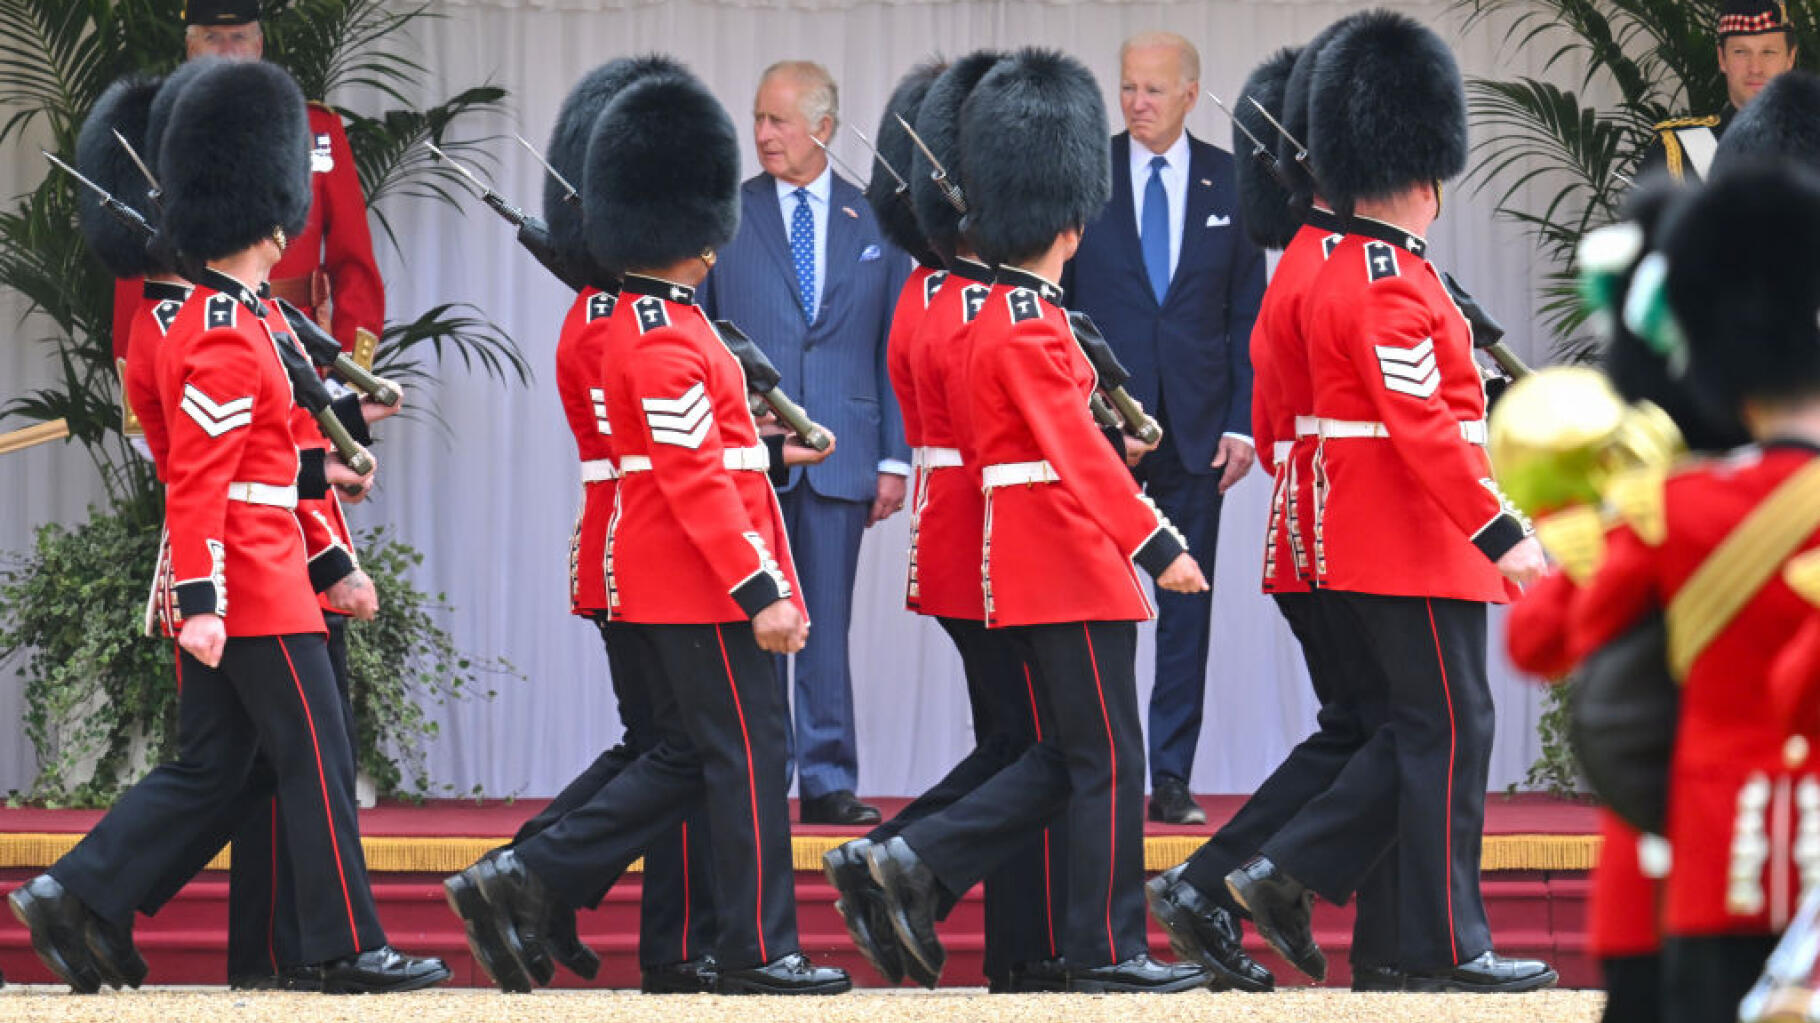 Images of the meeting between King Charles III and the President of the United States